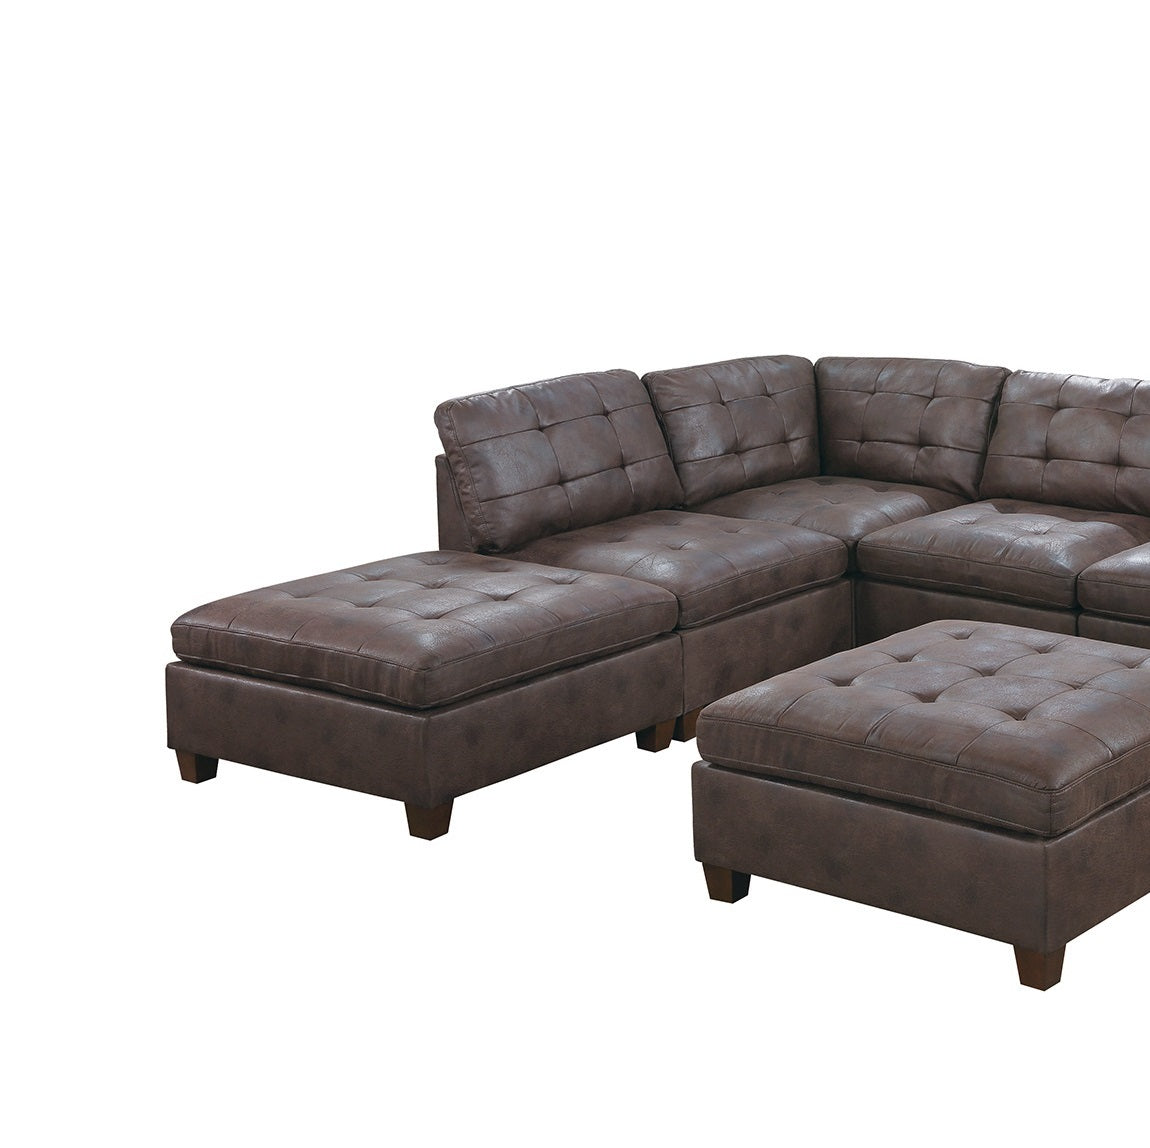 Living Room Furniture Tufted Armless Chair Dark Brown dark brown-primary living